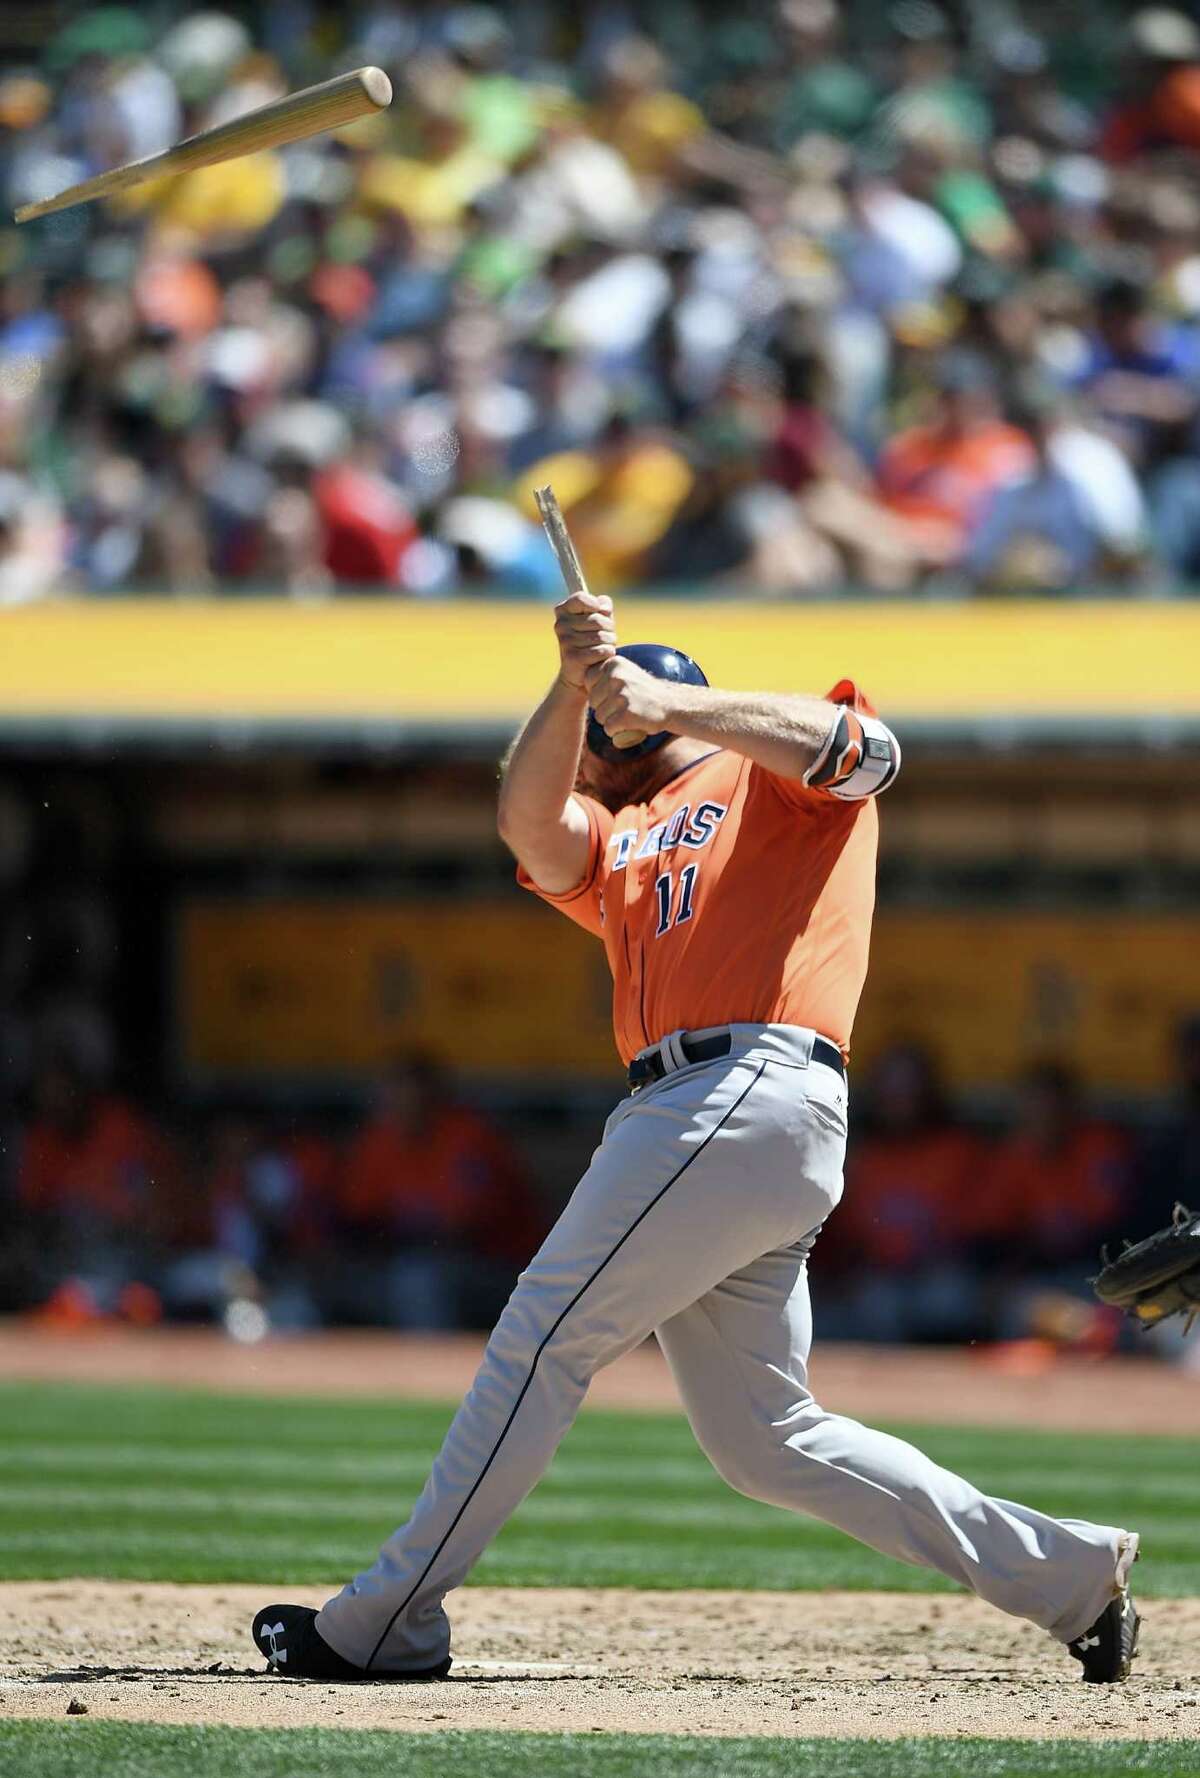 Evan Gattis shatters his bat on a fifth-inning groundout Saturday. With the bases loaded in the ninth, Gattis would hit into a game-ending 6-4-3 double play.